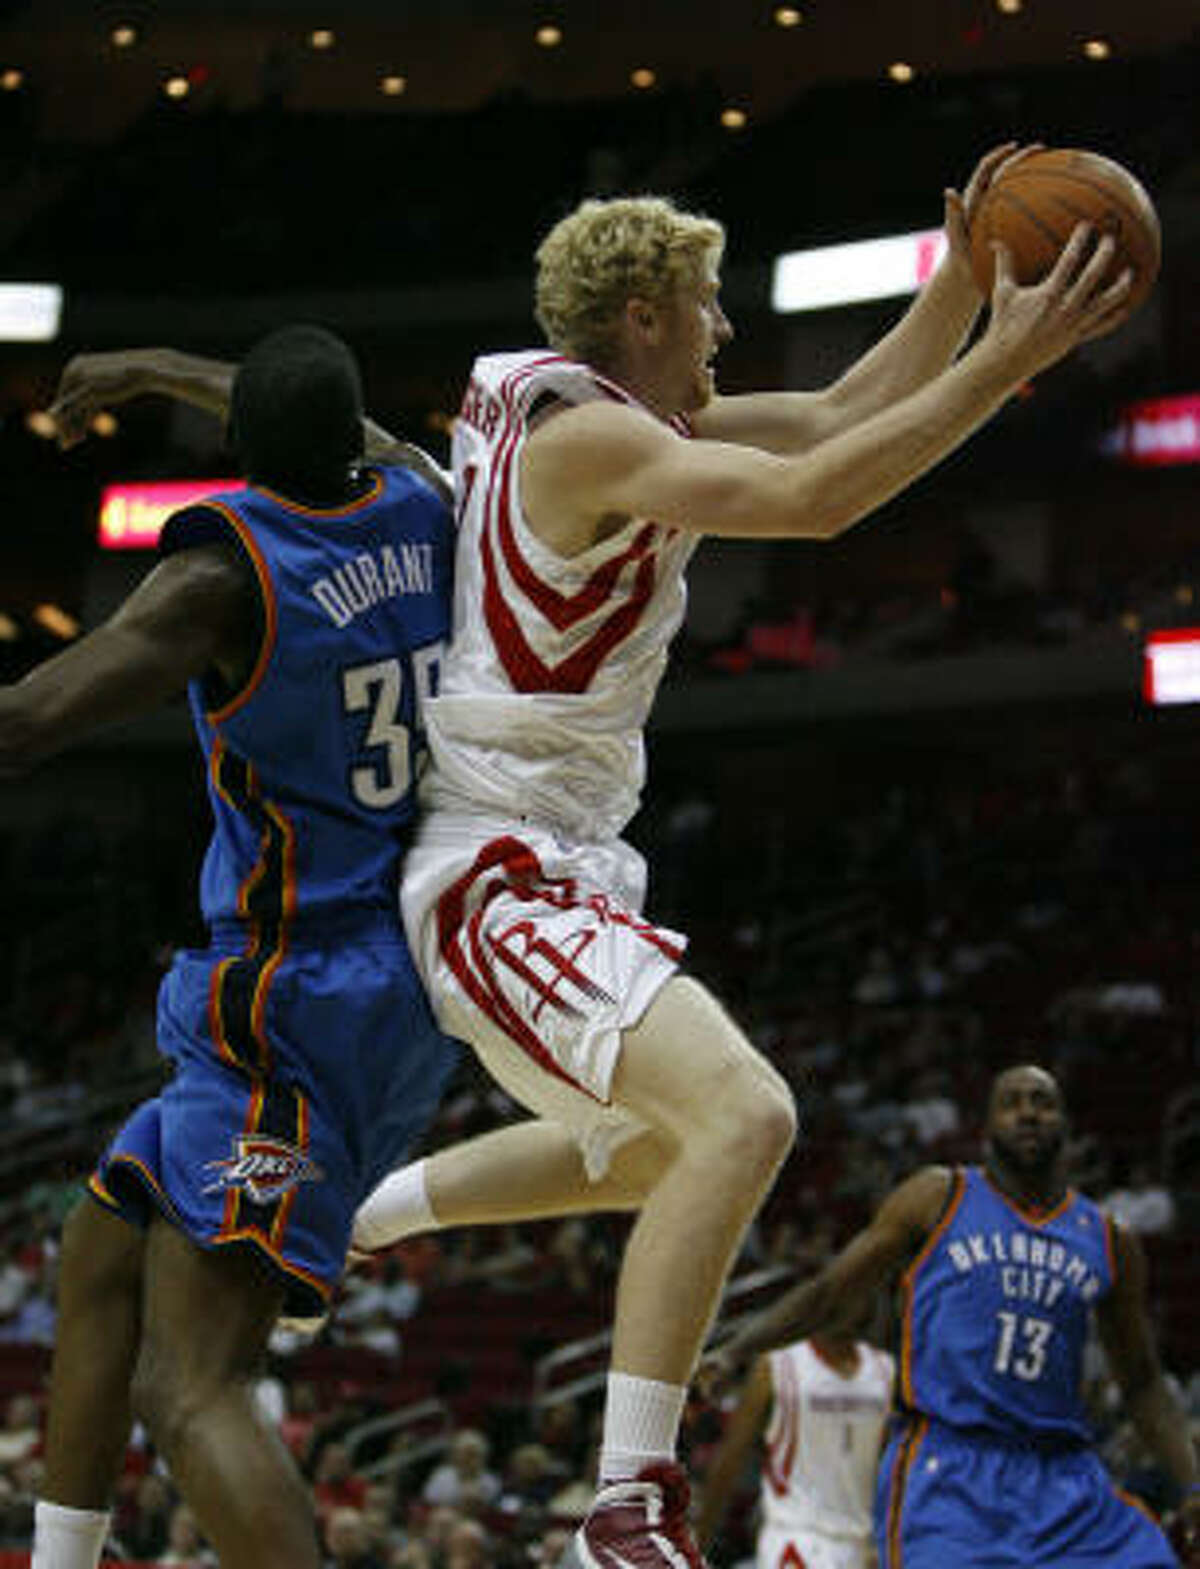 Chase Budinger scored 17 points to lead five Rockets players who reached double-digits.